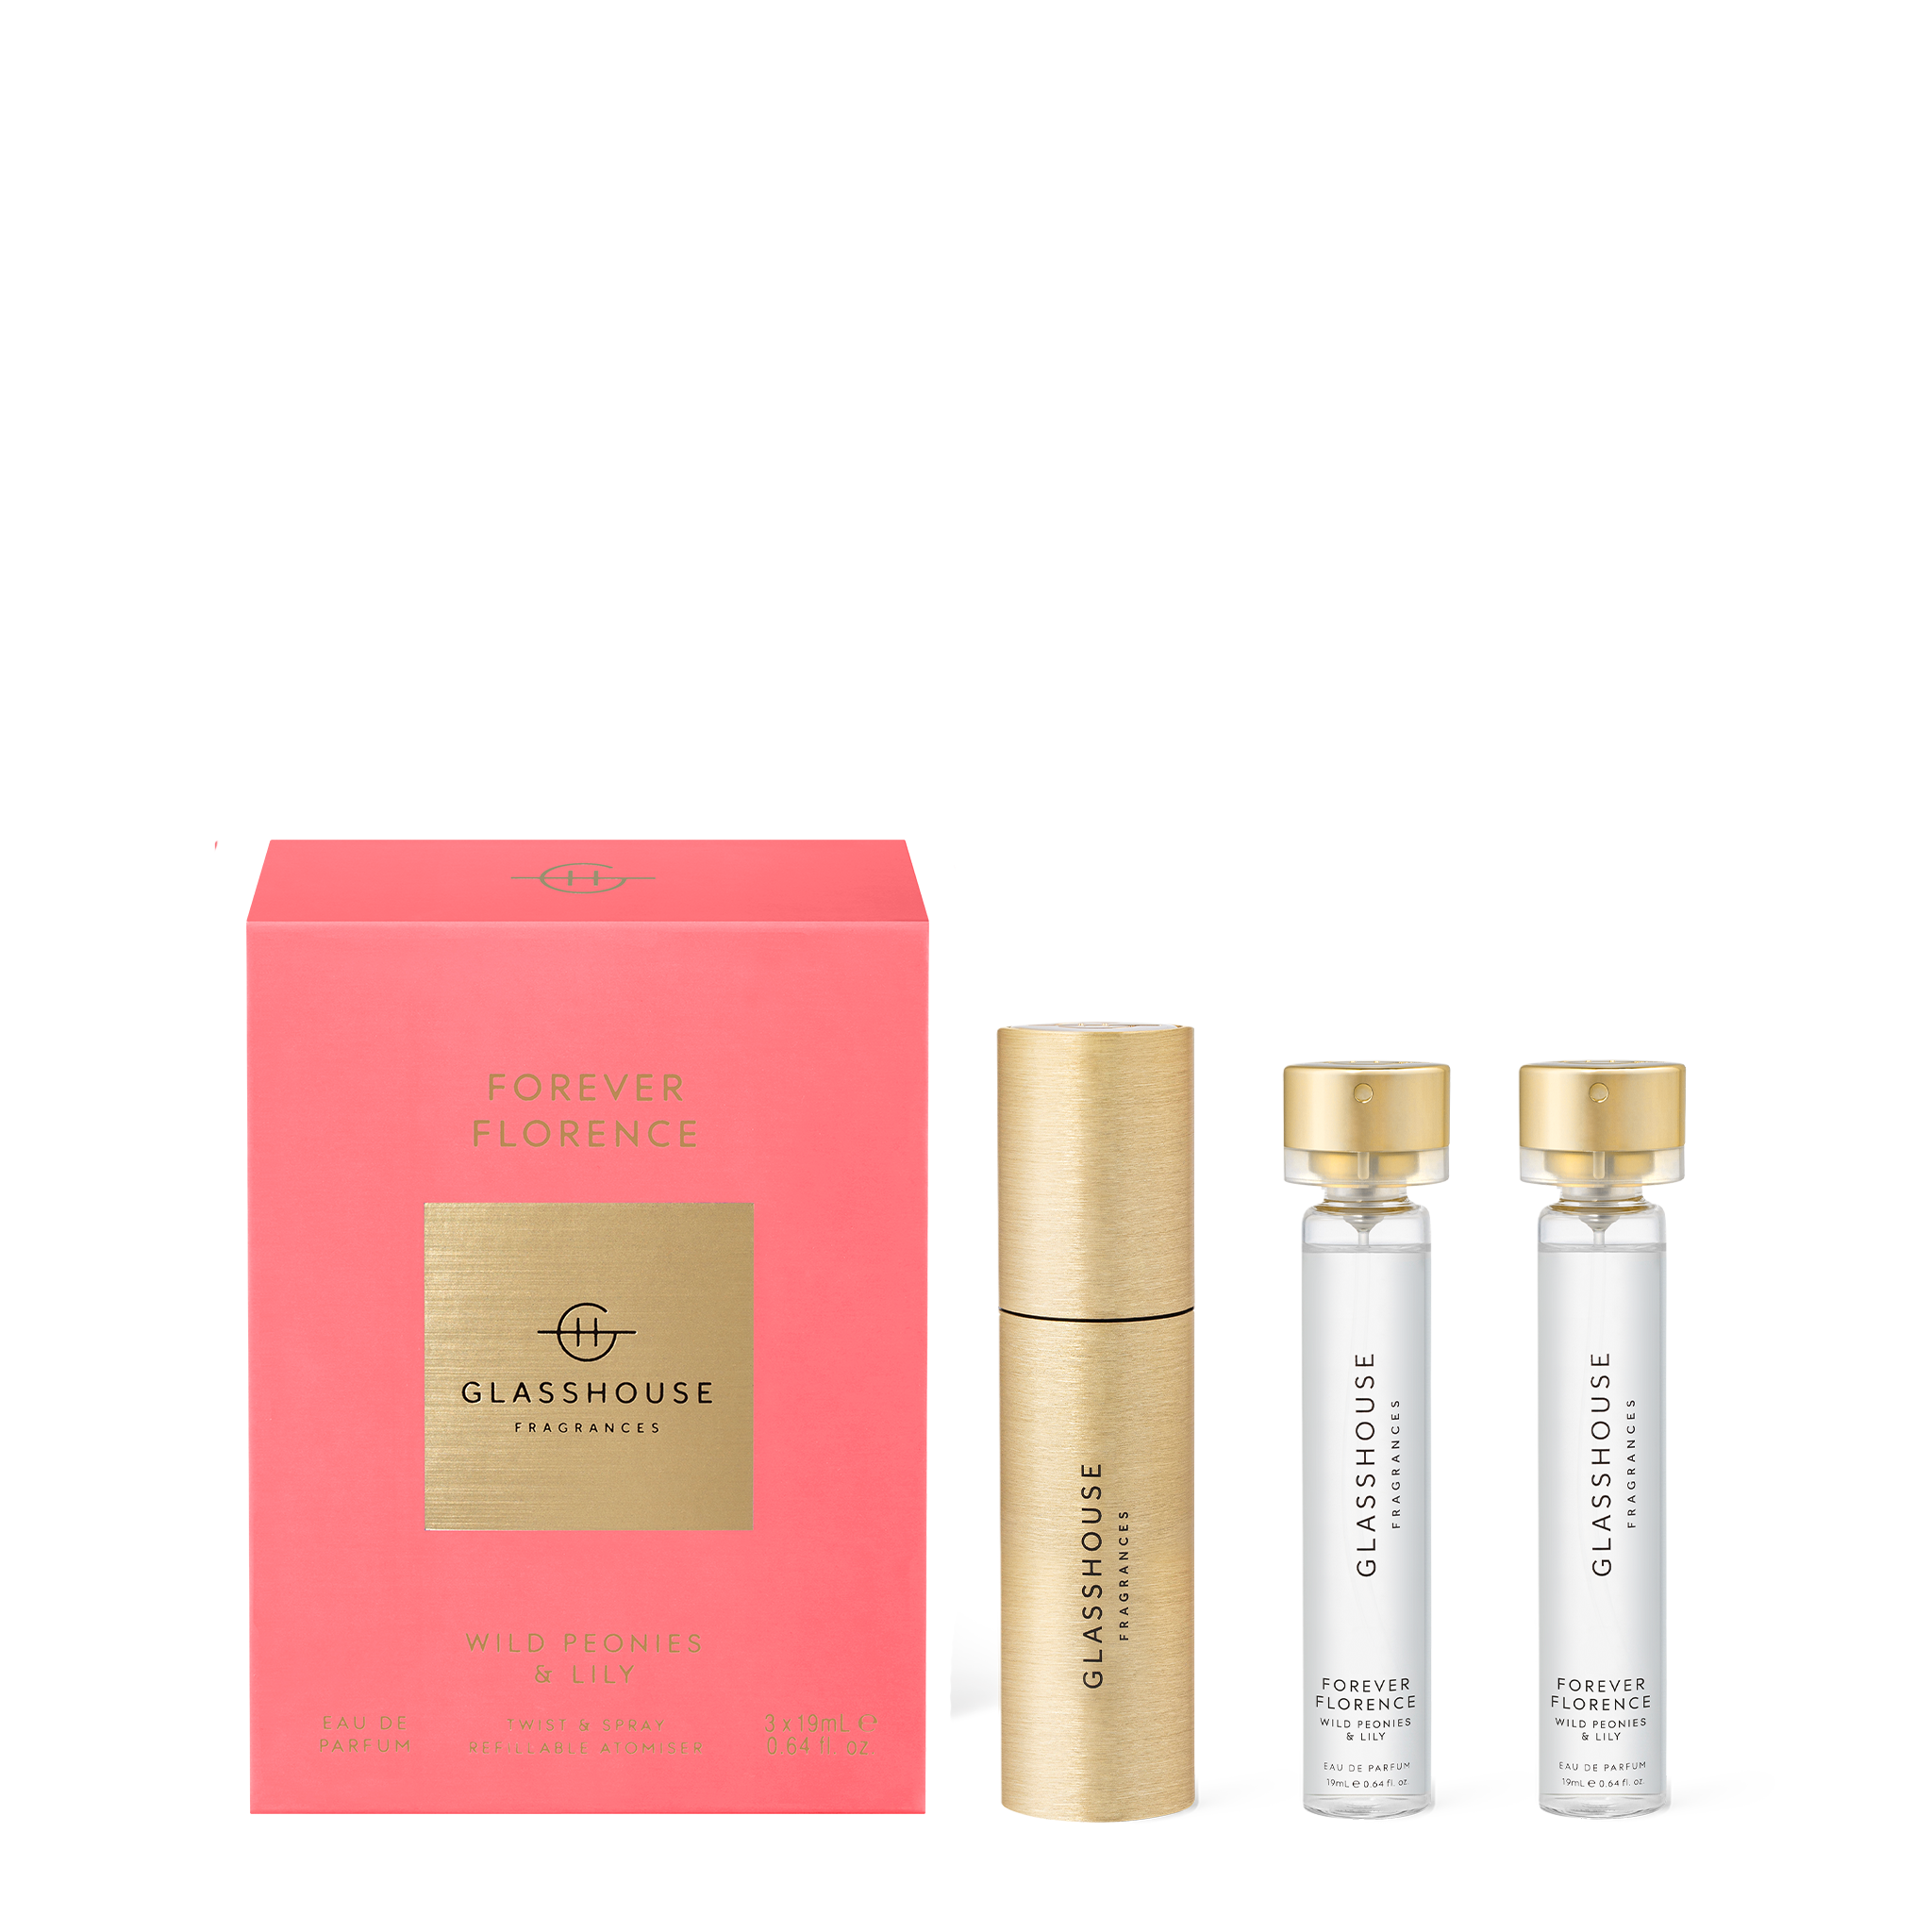 Glasshouse Fragrances Forever Florence Wild Peonies and Lily Twist and Spray Atomiser and refills with box